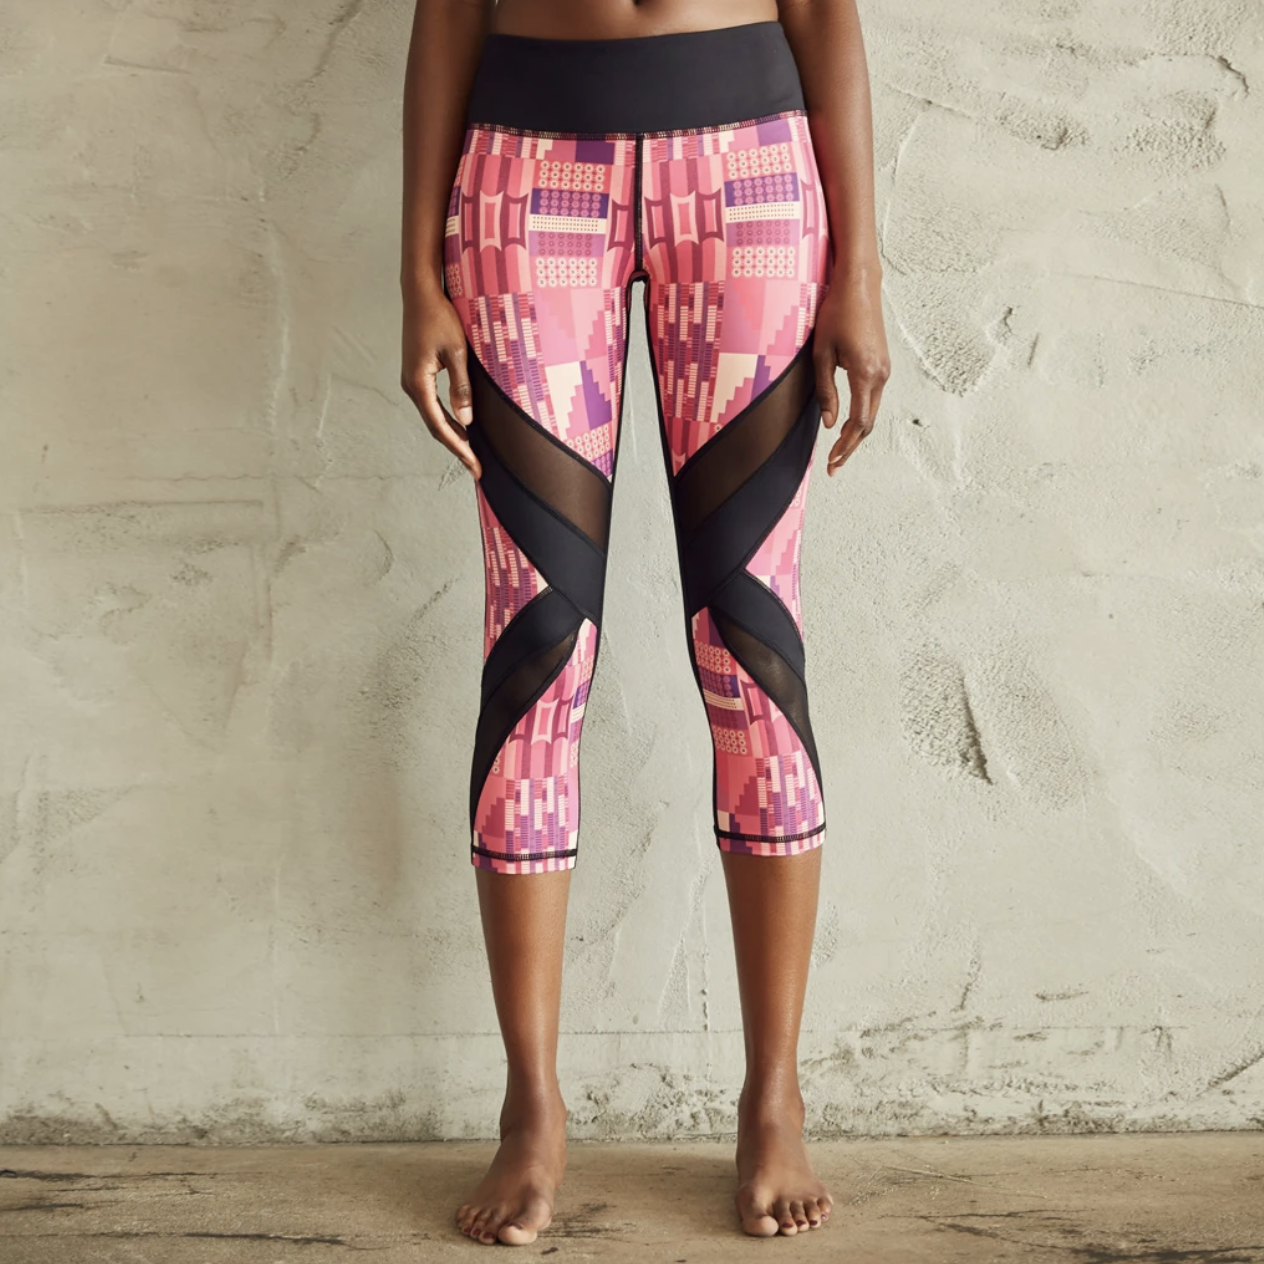 A model in pink West African-inspired print leggings with diagonal black mesh panels at the knees 